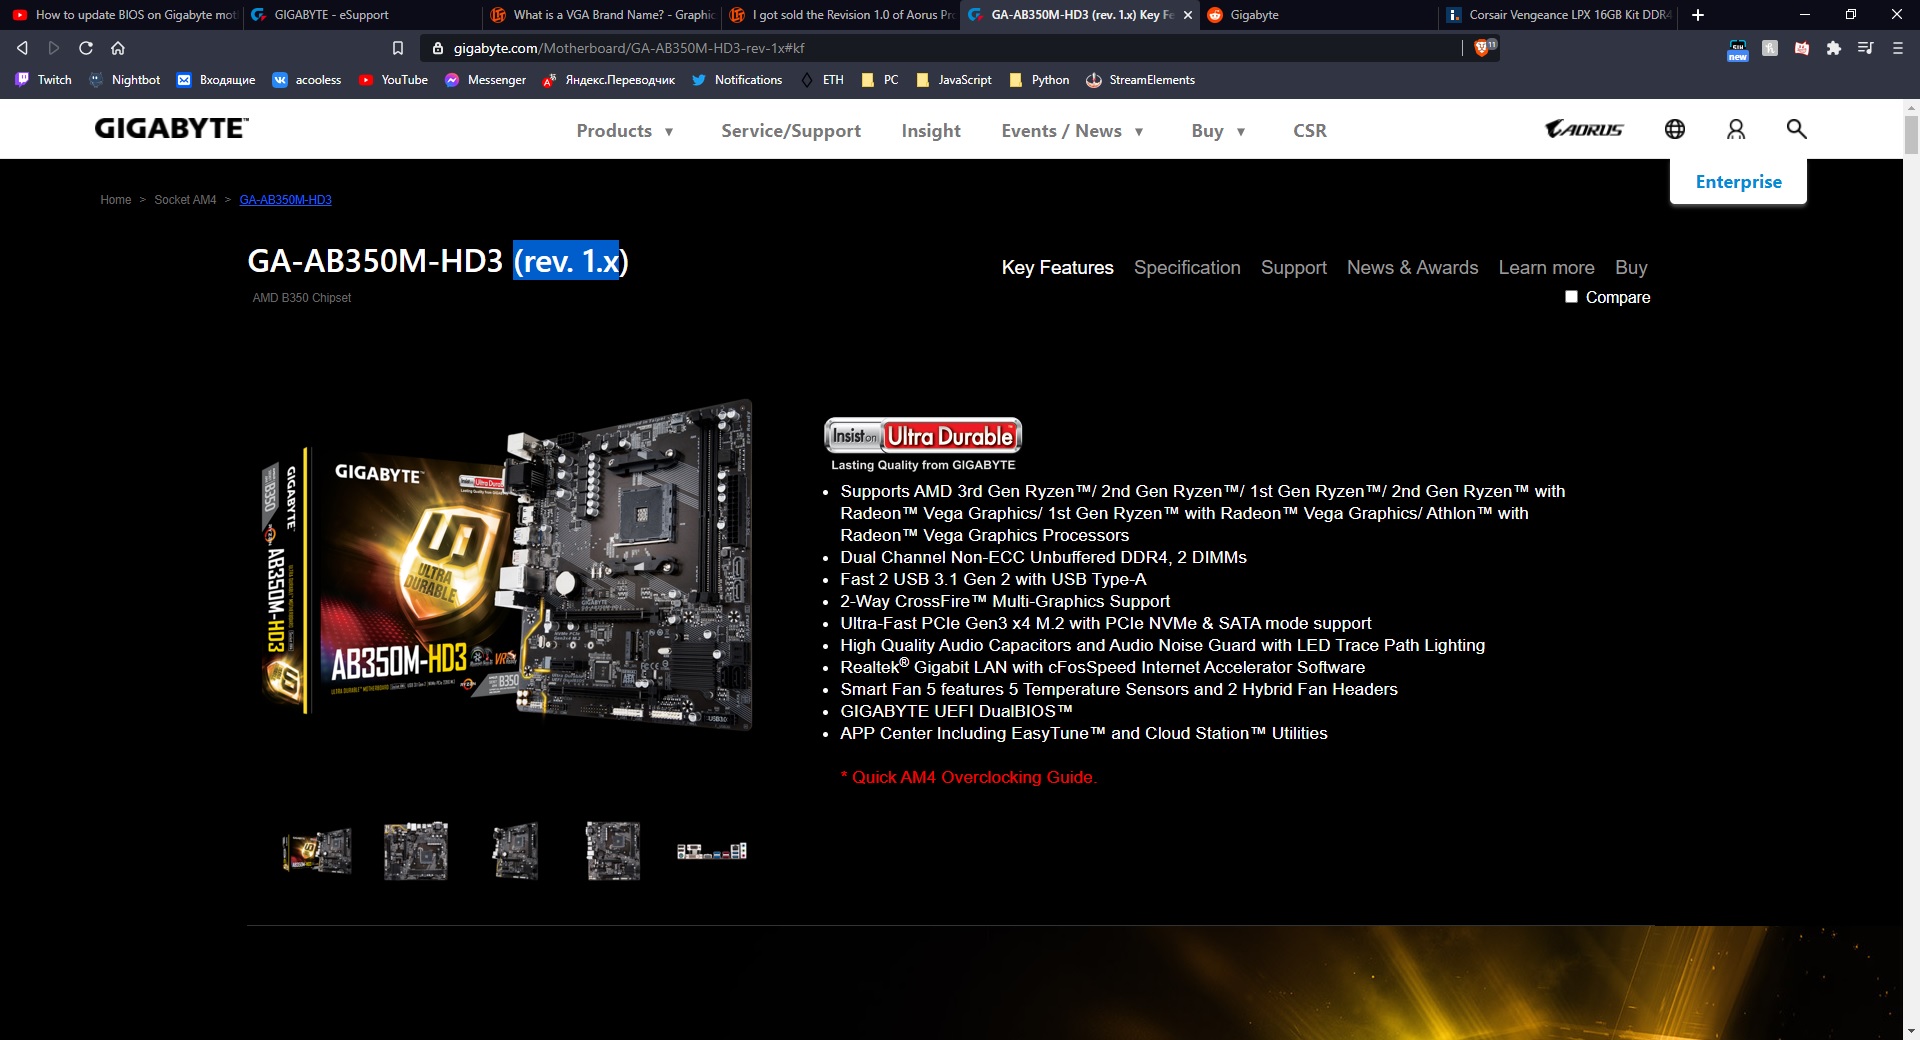 Can`t understand what revision my gigabyte motherboard has